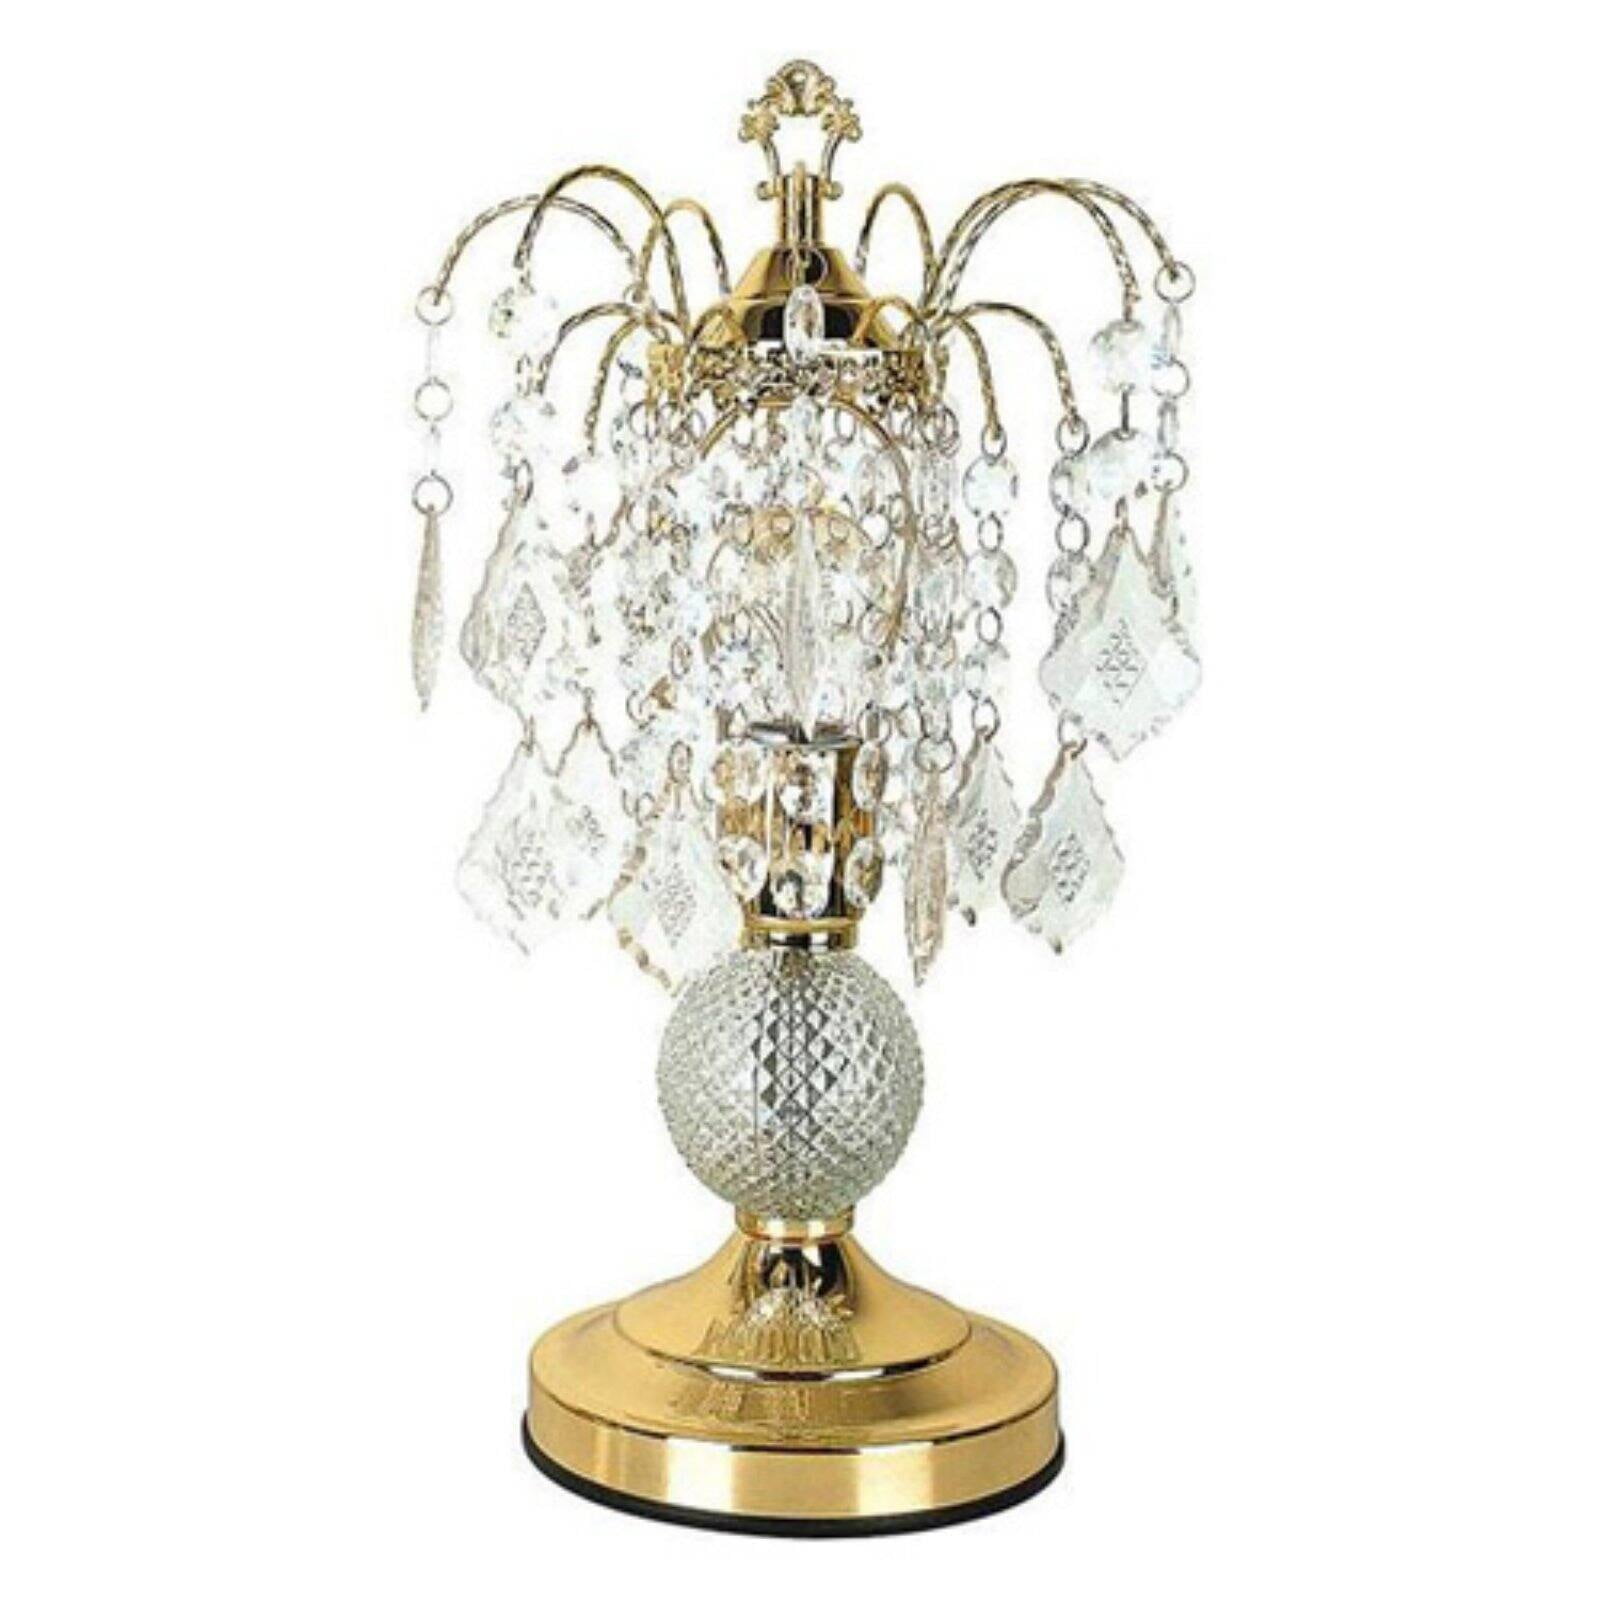 Acme Furniture Chandelier Touch Table, Chandelier Side Table Lamp